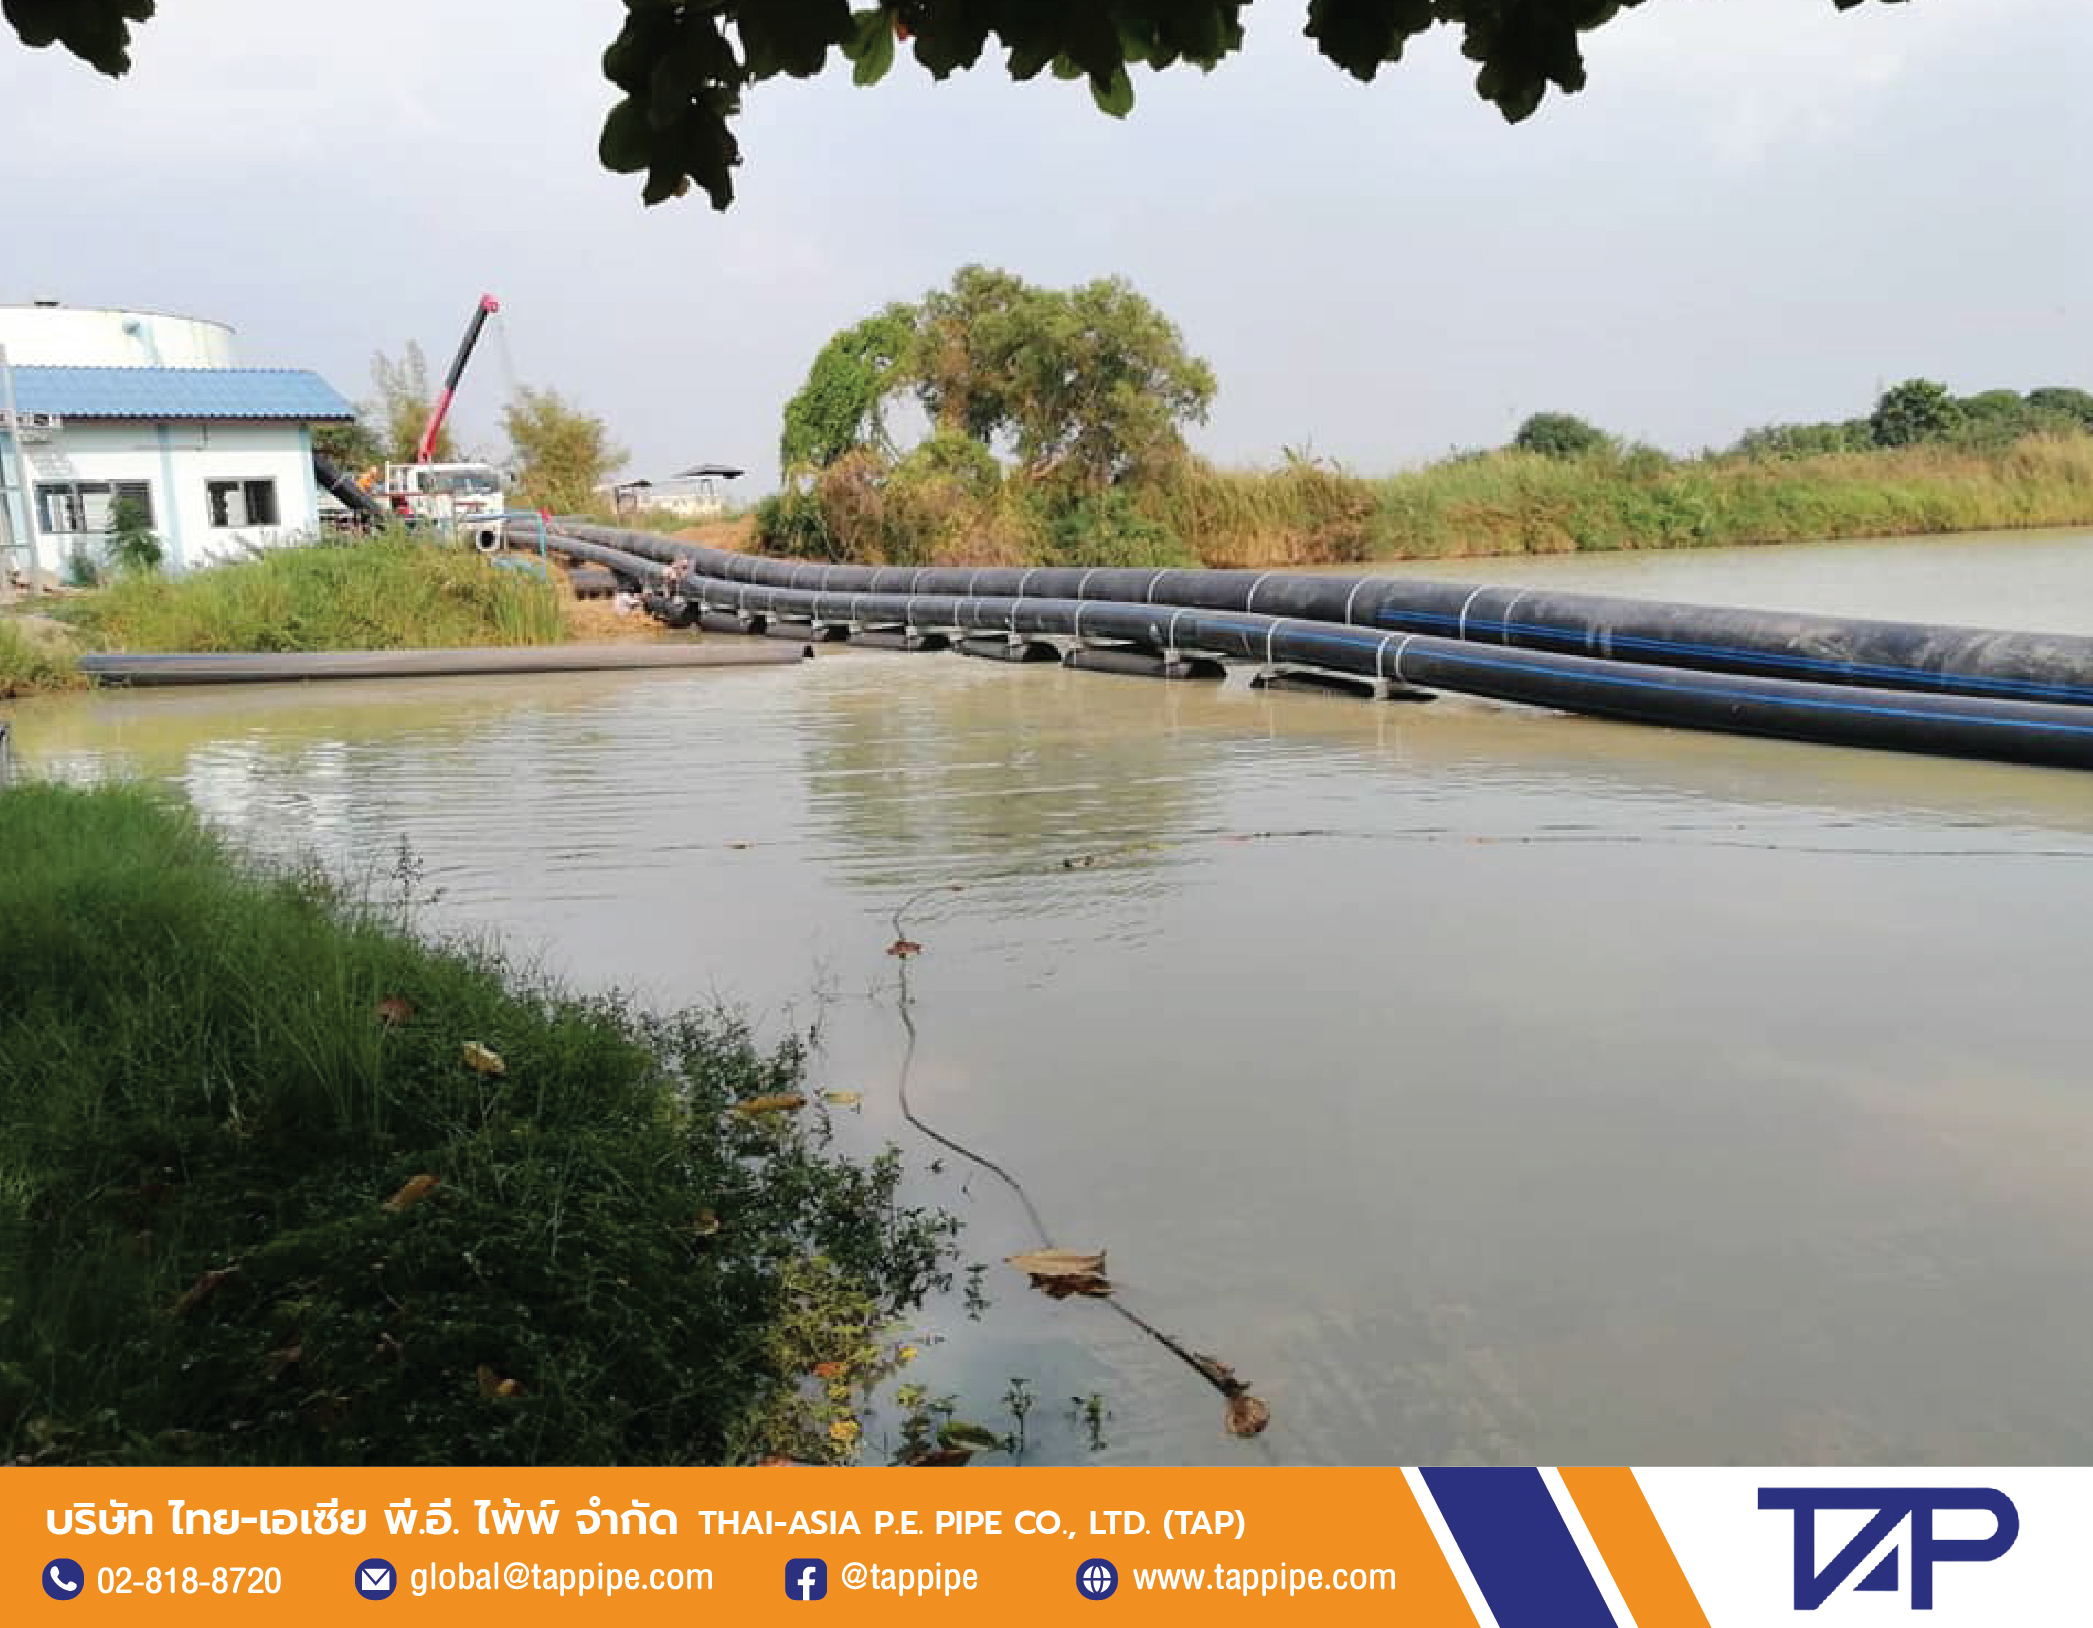 Installation of HDPE pipes across the river is done with floats made from corrugated pipes ( TAPKORR )